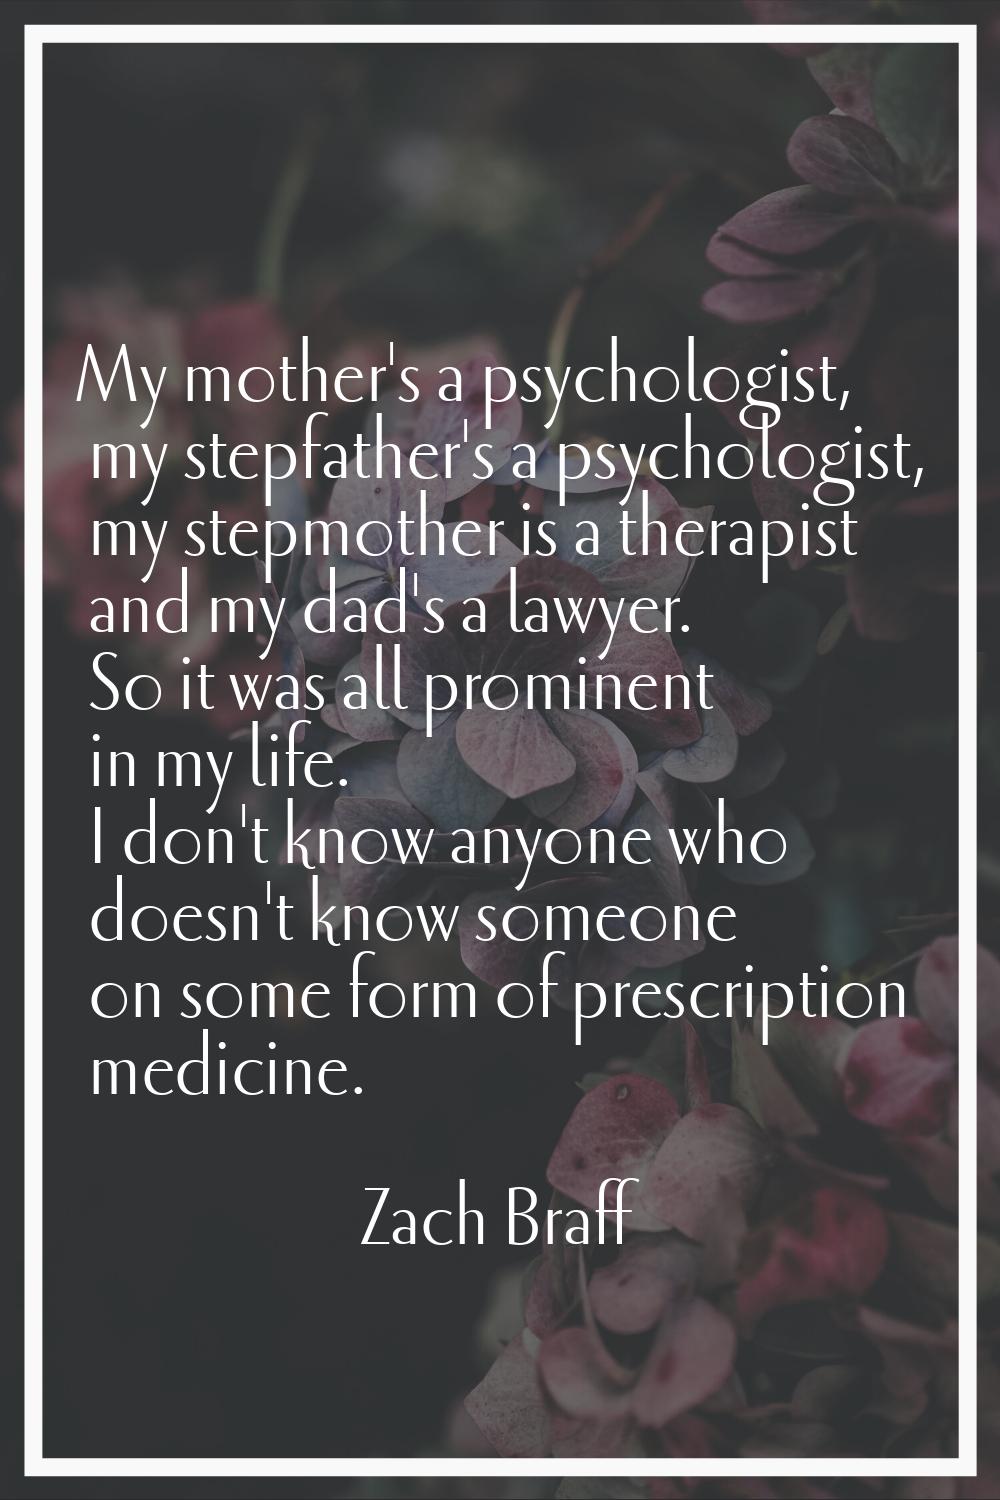 My mother's a psychologist, my stepfather's a psychologist, my stepmother is a therapist and my dad